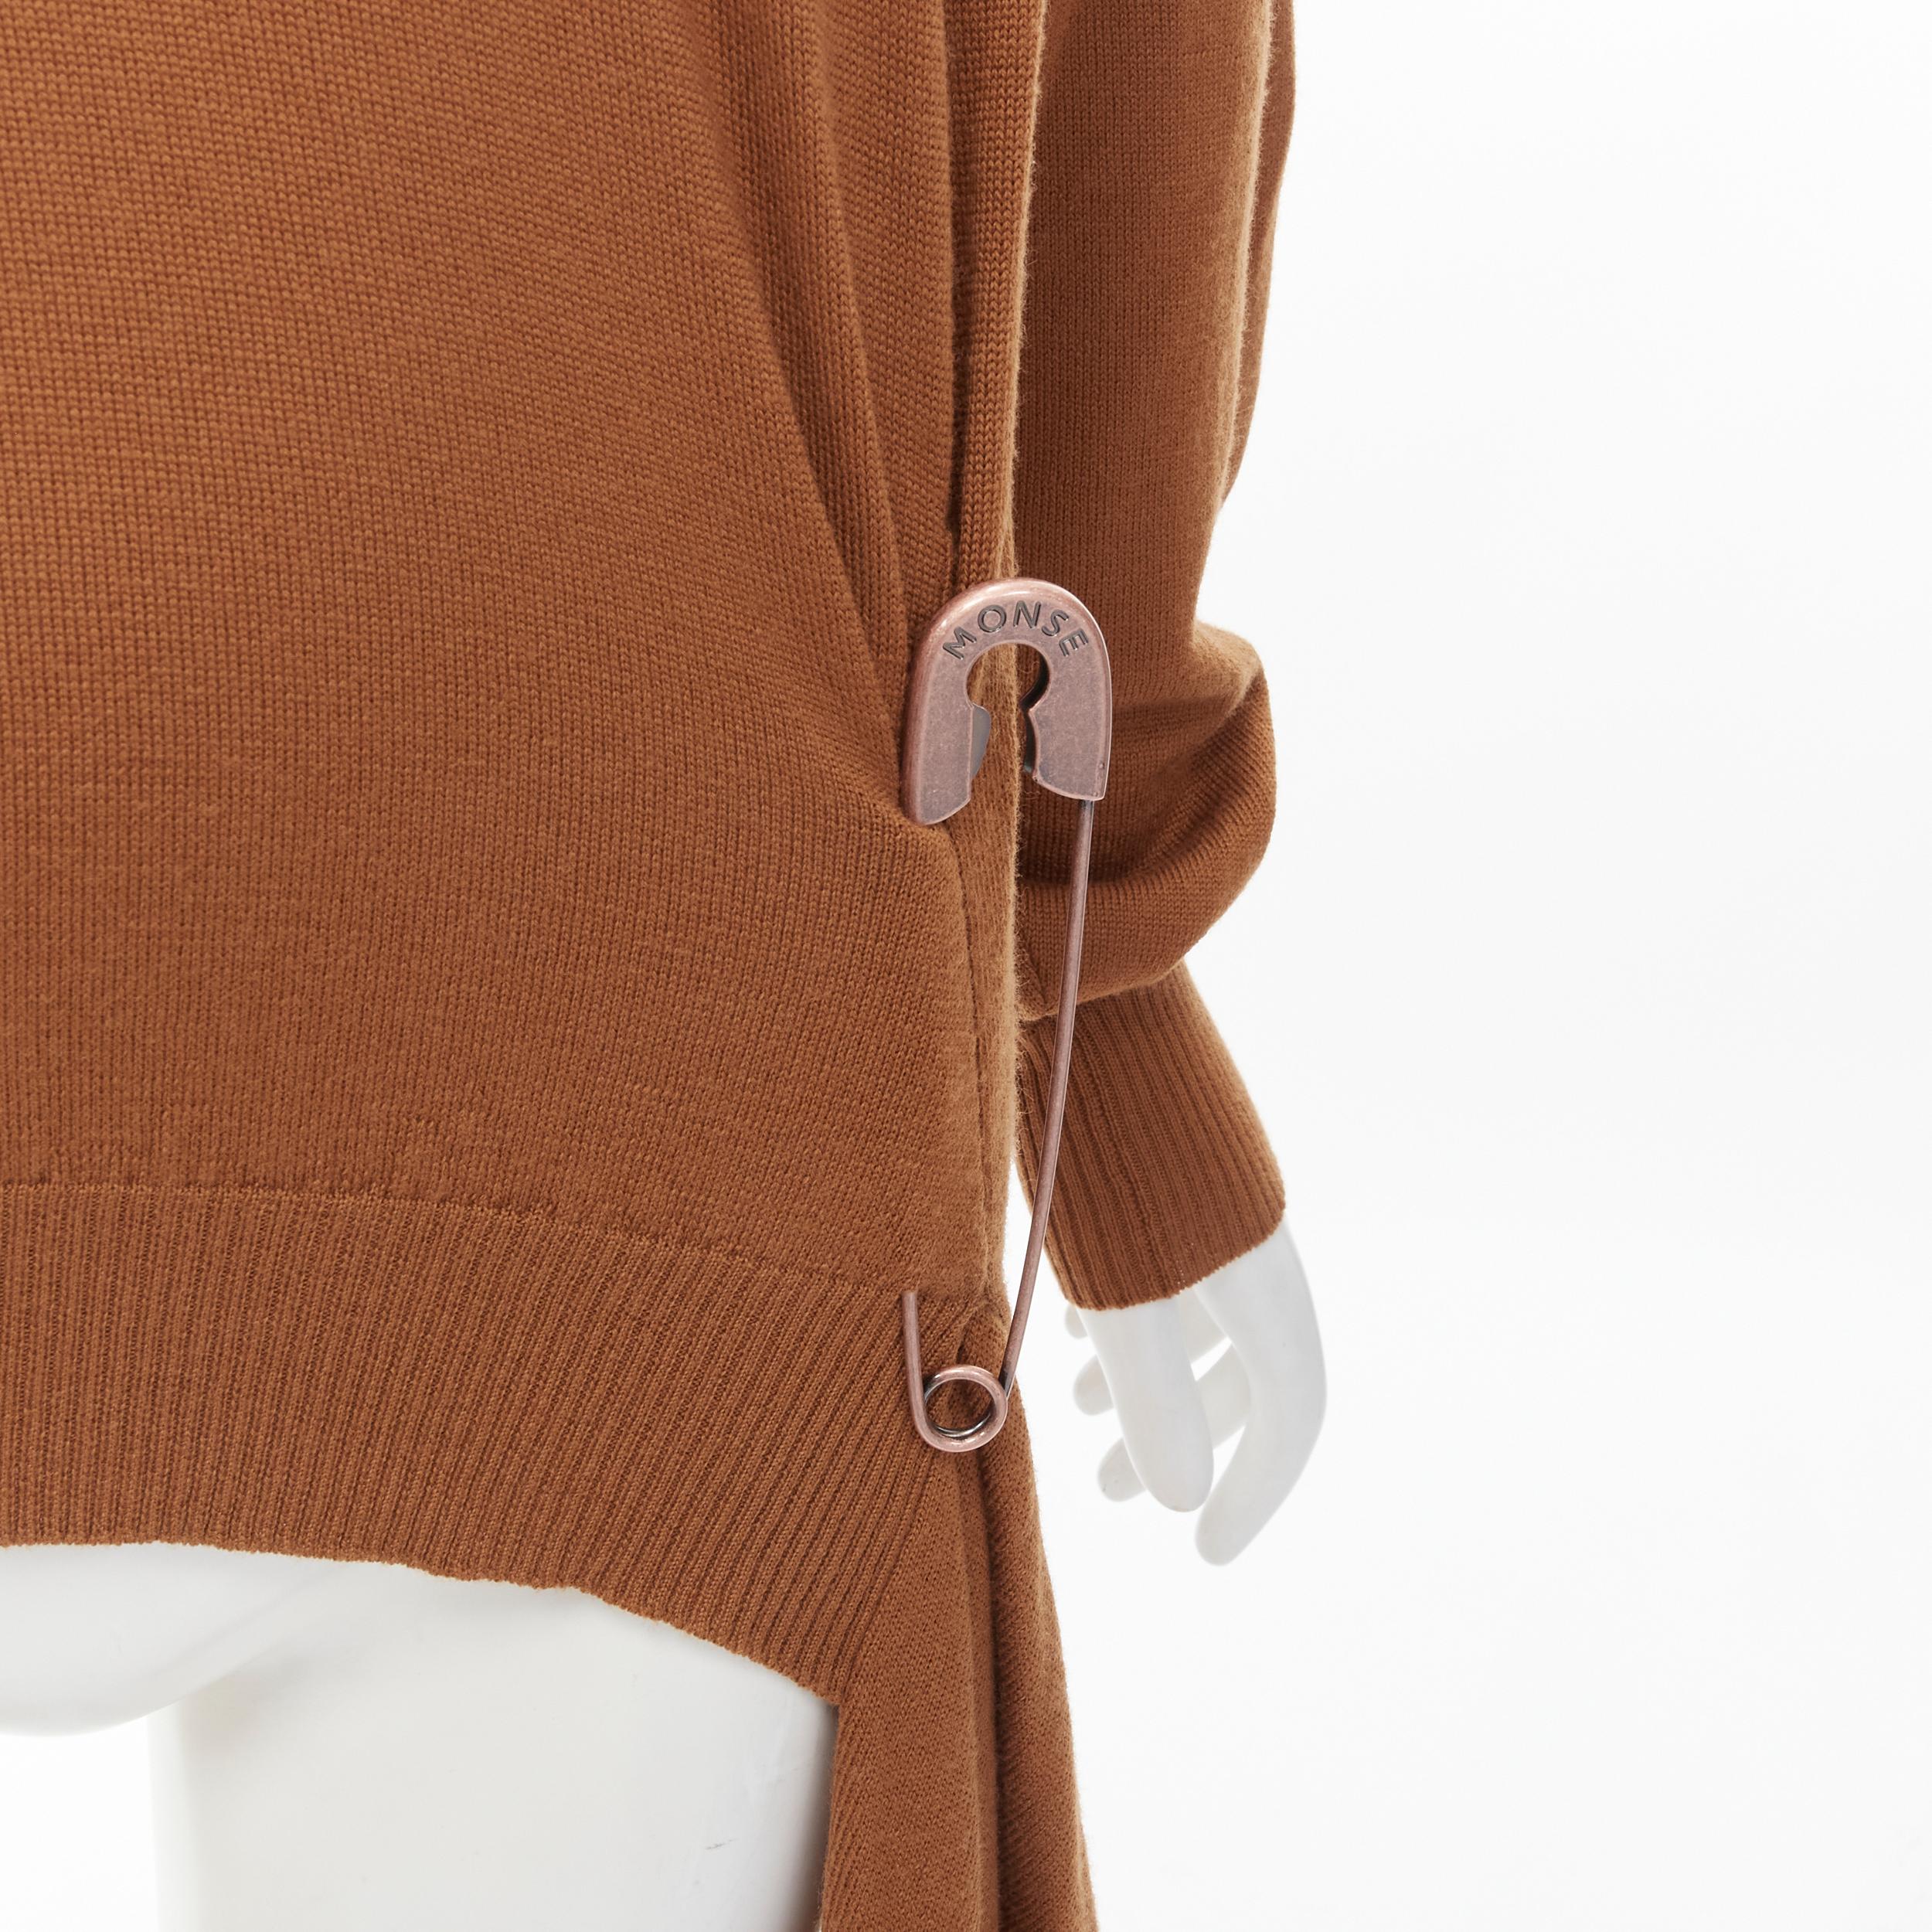 new MONSE brown 100% wool XL safety pin draped hem sweater M
Brand: Monse
Material: Wool
Color: Brown
Pattern: Solid
Extra Detail: Decorative detachable copper-tone XL metal safety pin at hem. Draped hem.
Made in: Italy

CONDITION:
Condition: New